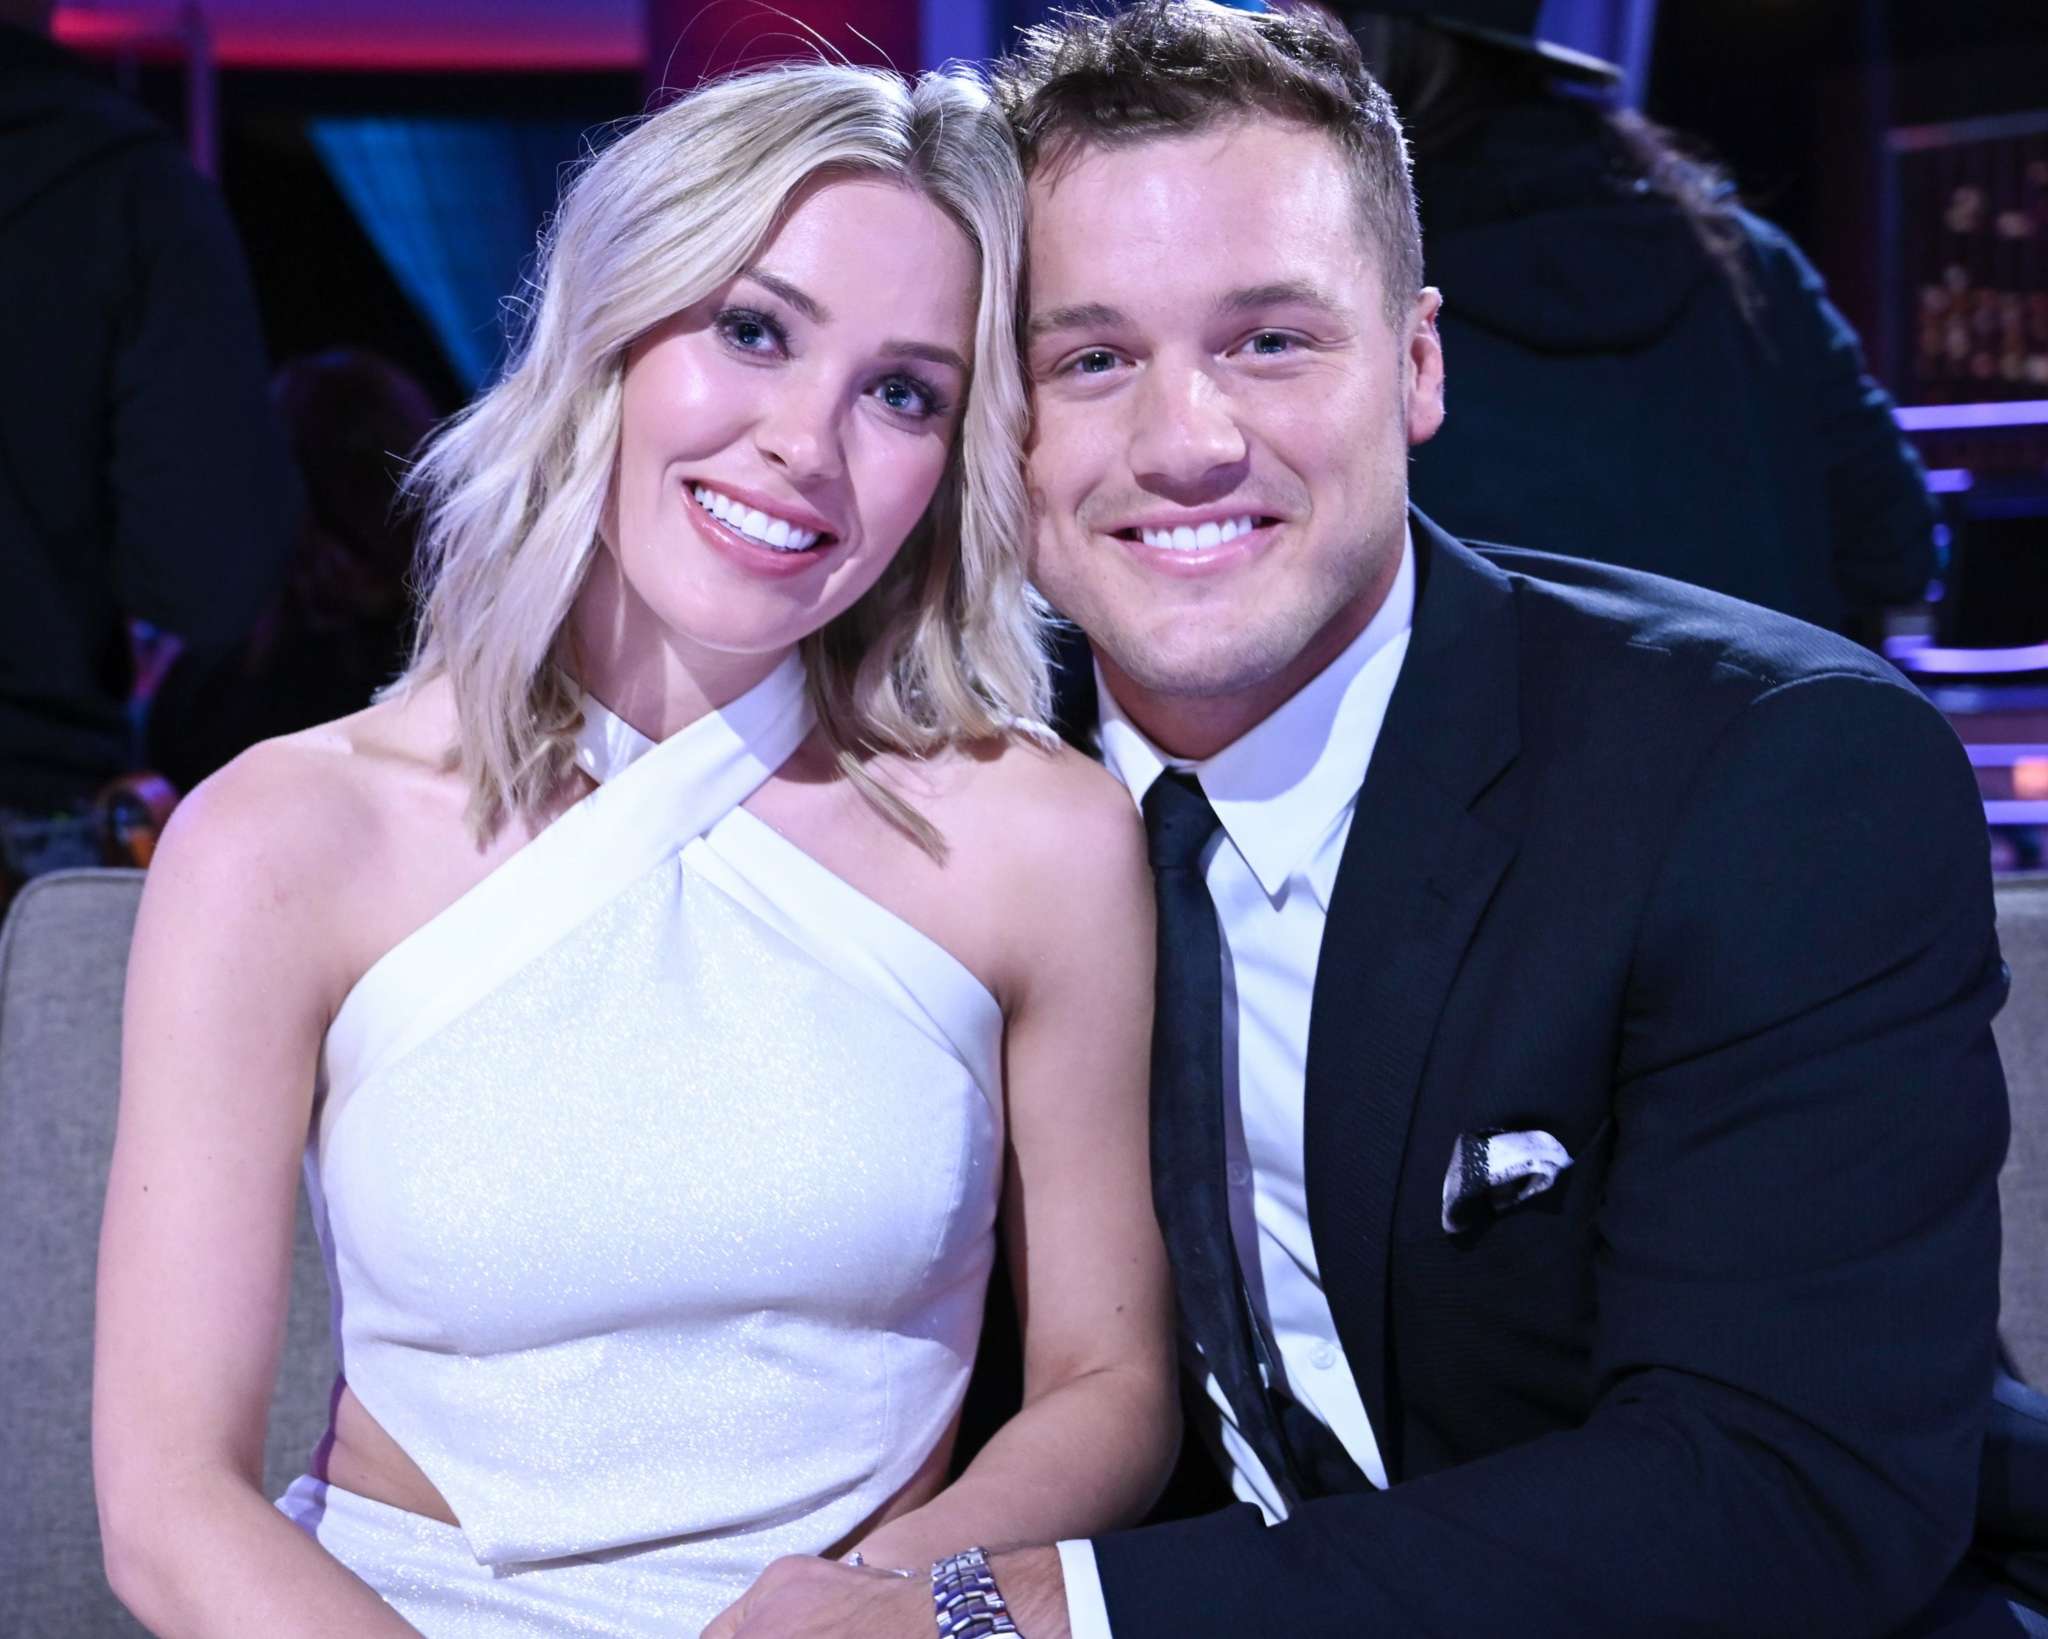 ”colton-underwood-bitterly-jokes-about-his-cassie-randolph-split-and-bachelor-fans-think-it-was-too-soon”